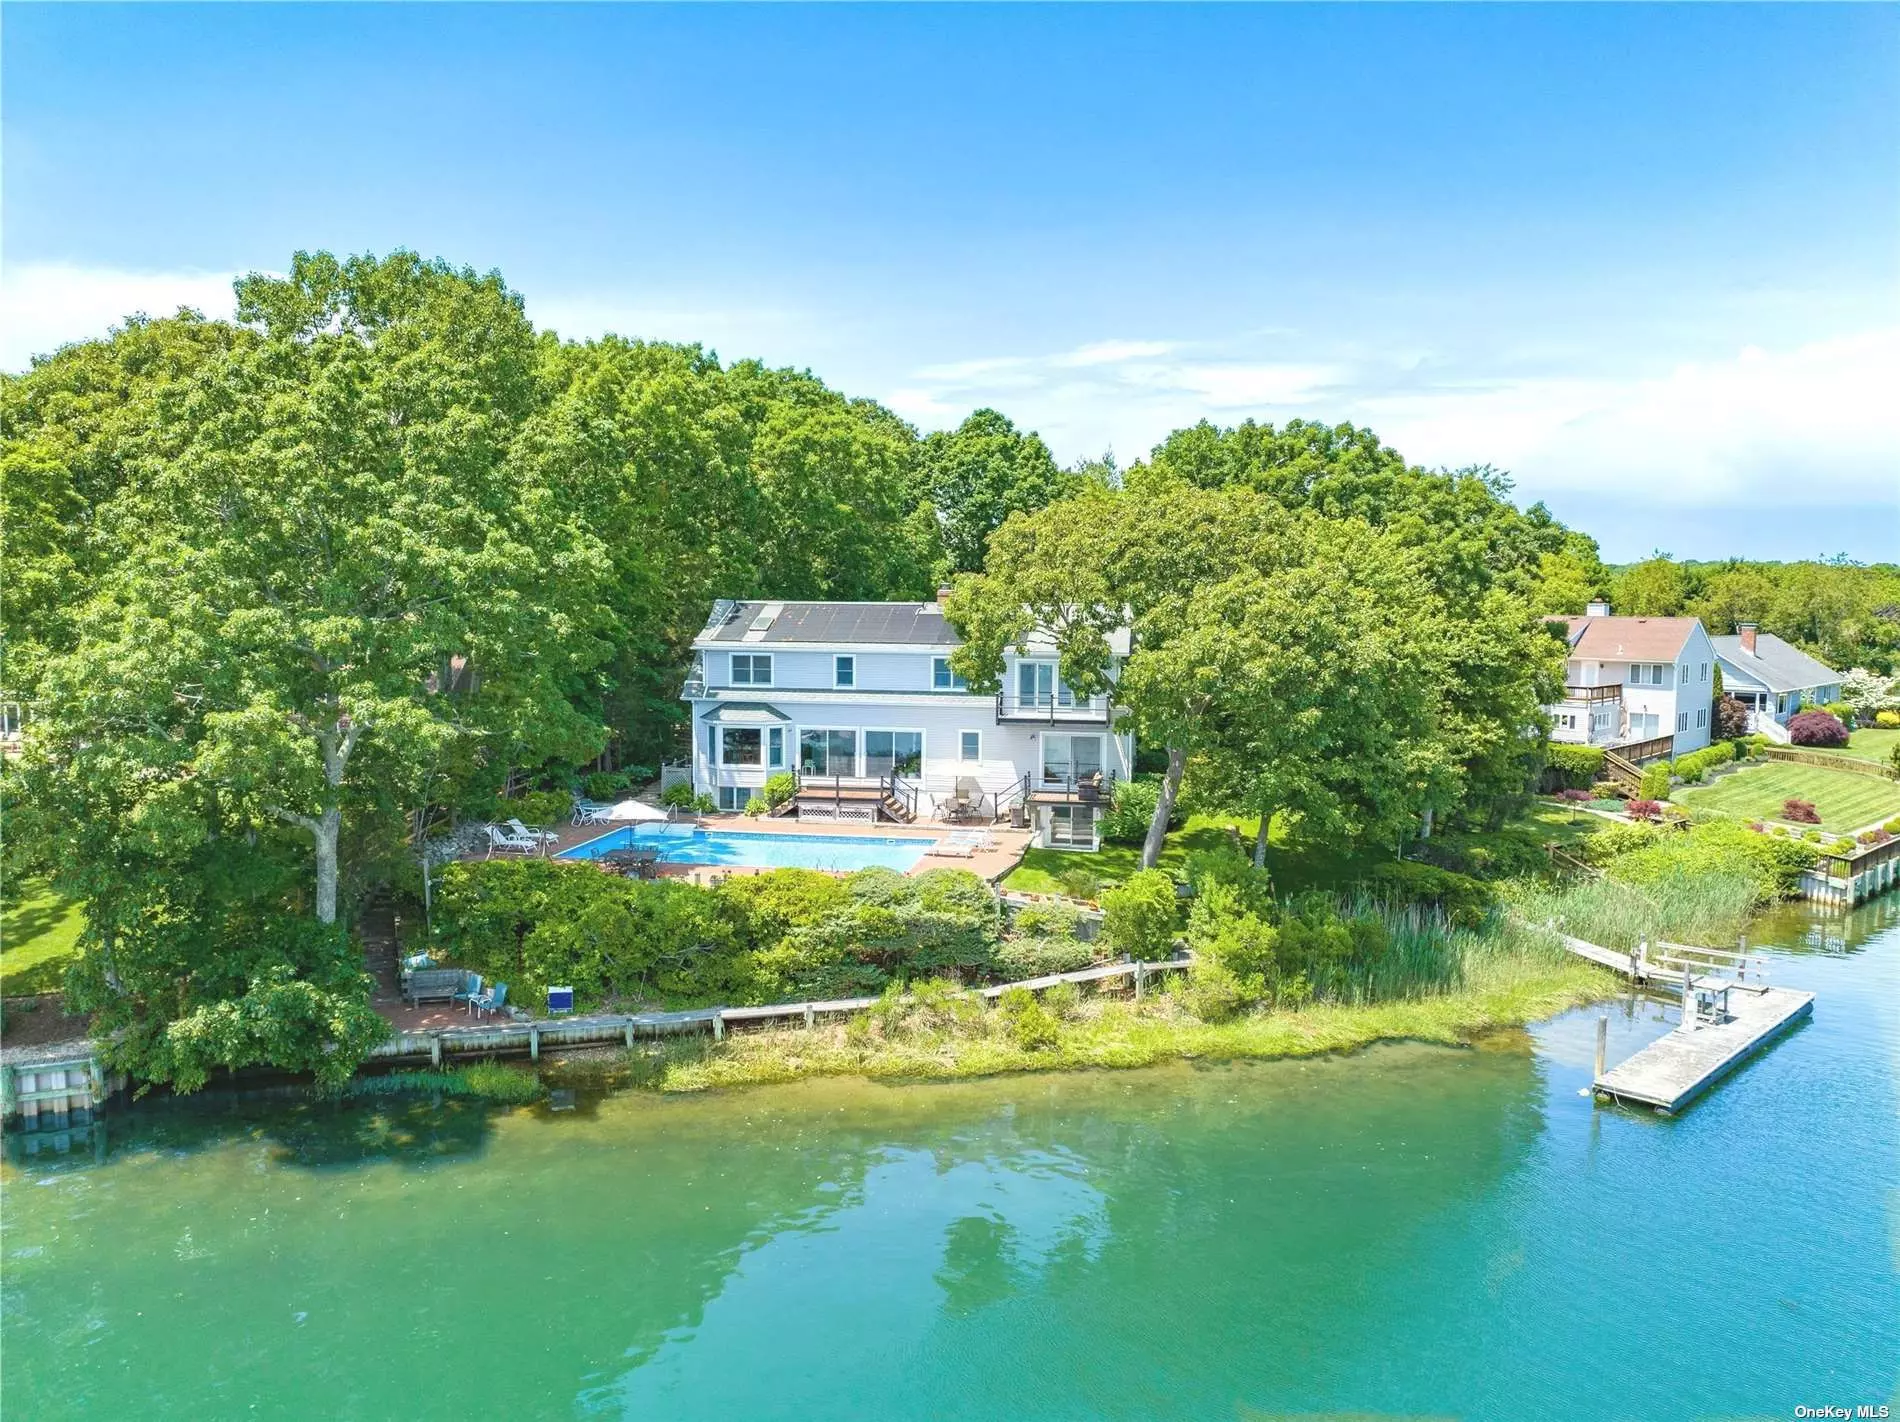 Perfectly Sited Waterfront Home with Heated Pool, Deep Water Dock and Community Bay Beach. Direct Open Views Across Gull Pond to the Bay Beyond. Water Side Seating Area and Catwalk to Access the Natural Shore Line for Fishing or Wading in the Water. 169 Feet of Water Frontage. Room For All with 5+ Bedrooms and 4 Full Baths. Livingroom with Fireplace. Primary Suite with Balcony Overlooking Pool, Dock, Gull Pond and the Bay. Fully Finished and Legal Basement Area with Game/Family Room, Separate Office/Den with Full Size Window, Wet Bar Area, Full Bath and Direct Access to Pool. Marble Baths, Steam Showers and Jacuzzi Tubs too. Radiant Heat in Several Rooms. View the Virtual Tour or Floor Plan Attachment. A Must See Property!